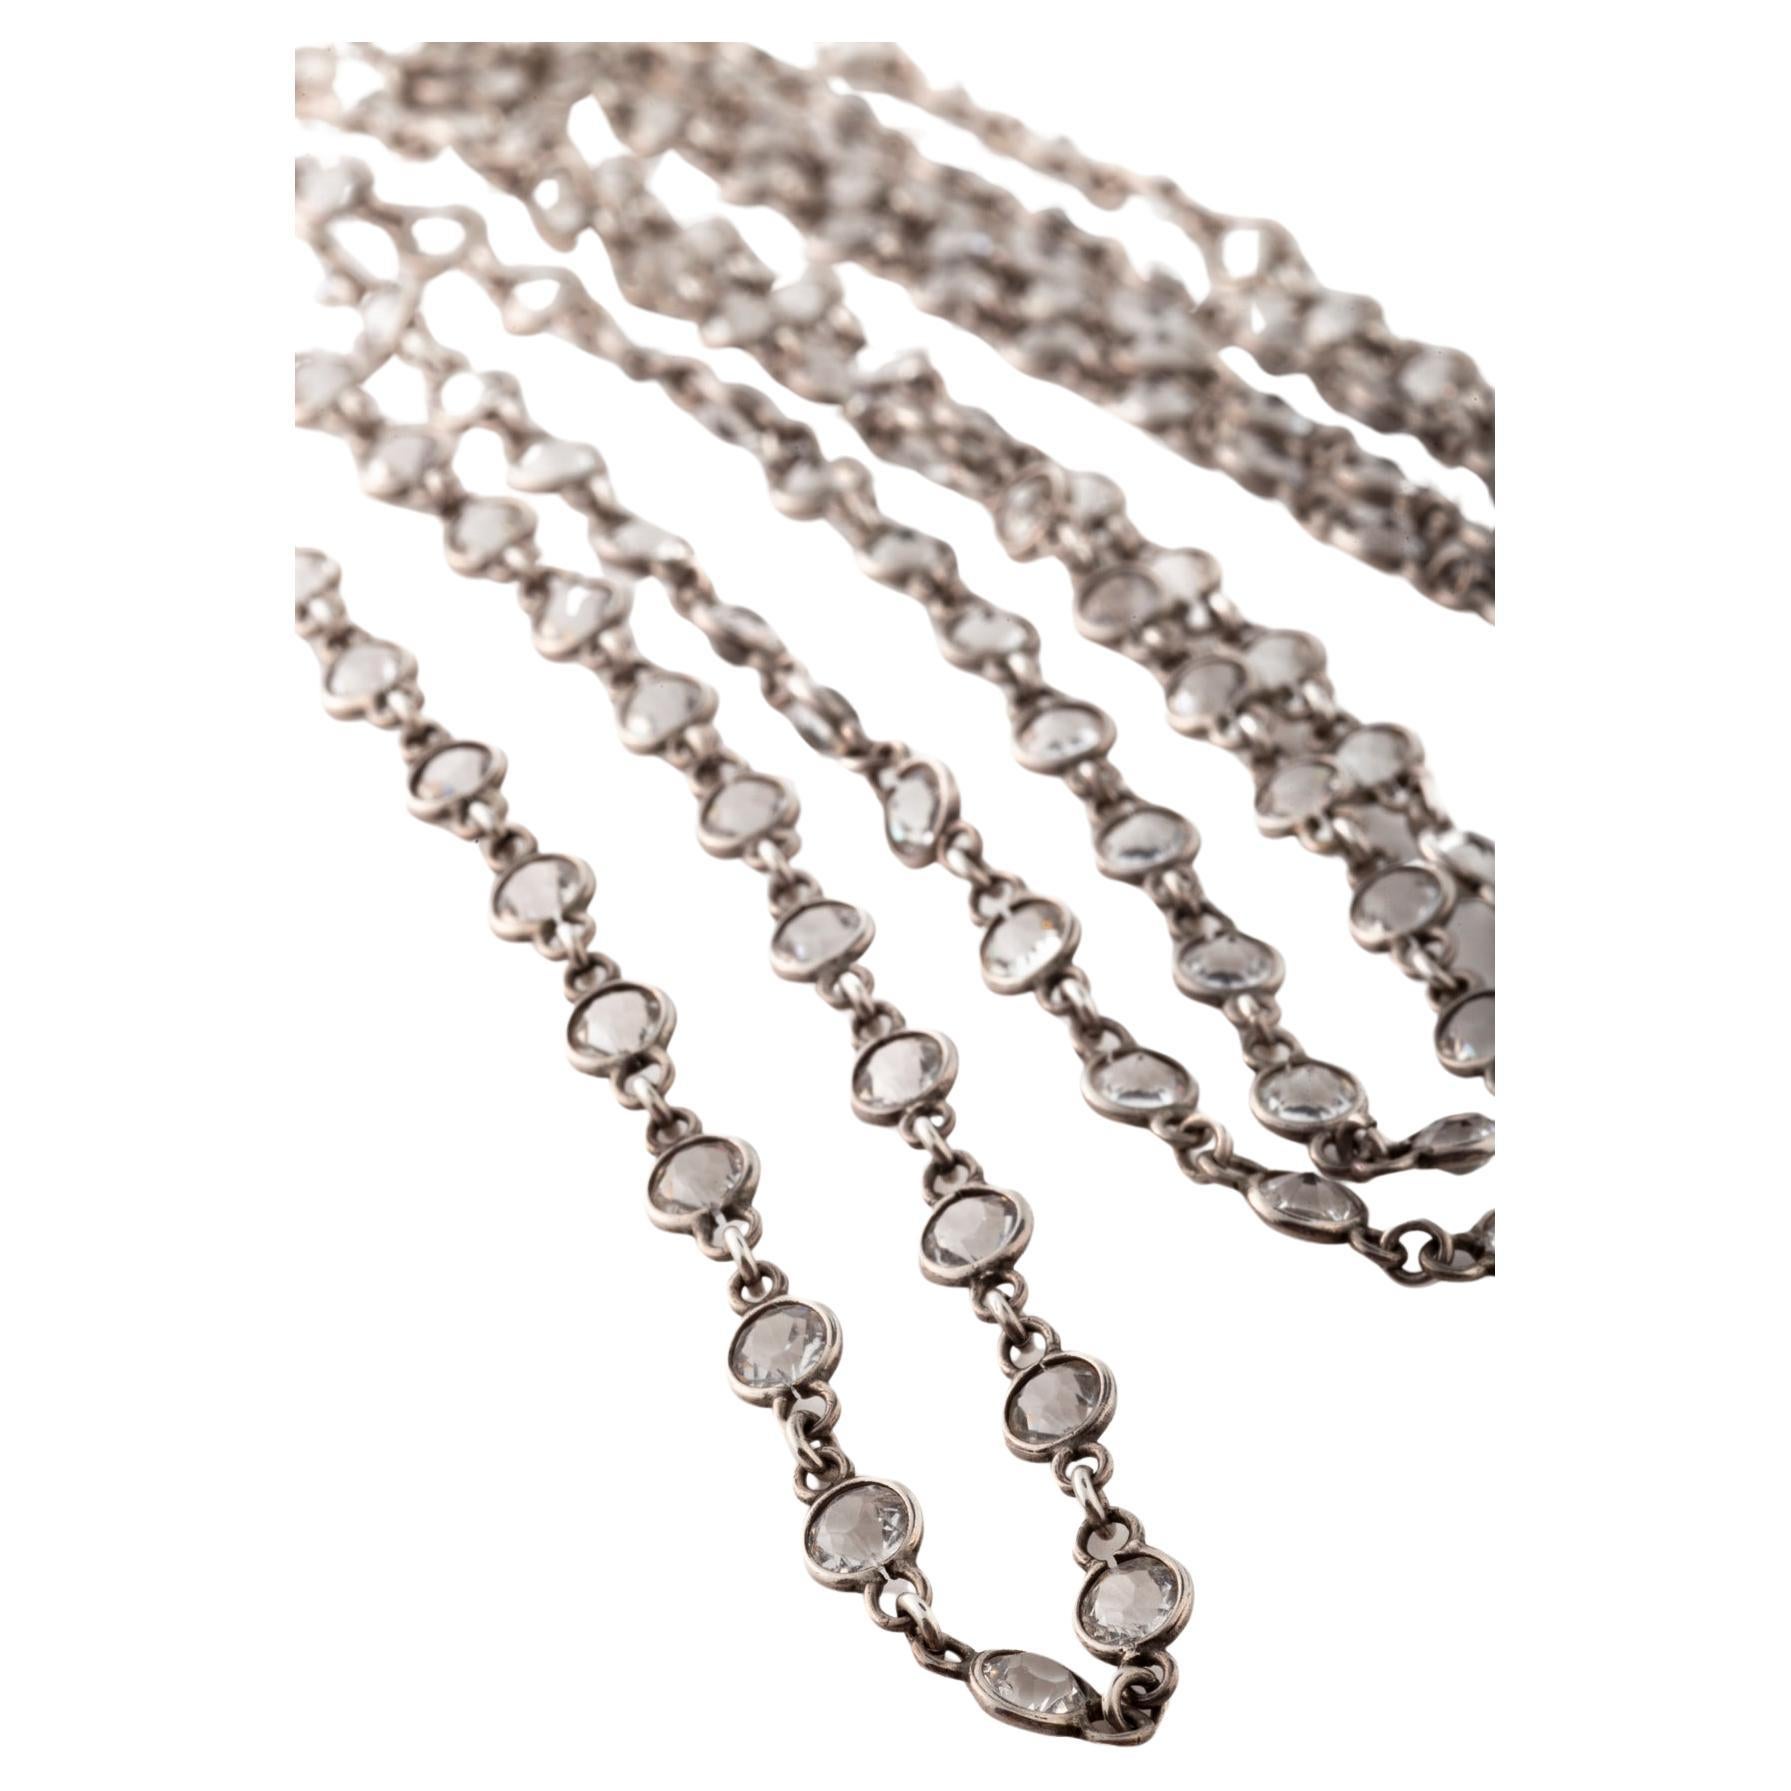 Faceted white topaz fills this chain with little space between the stones. The length is wonderful. It can be wrapped around the body twice or divided into two chains. The links and settings and clasp are strong sterling silver. I often use these